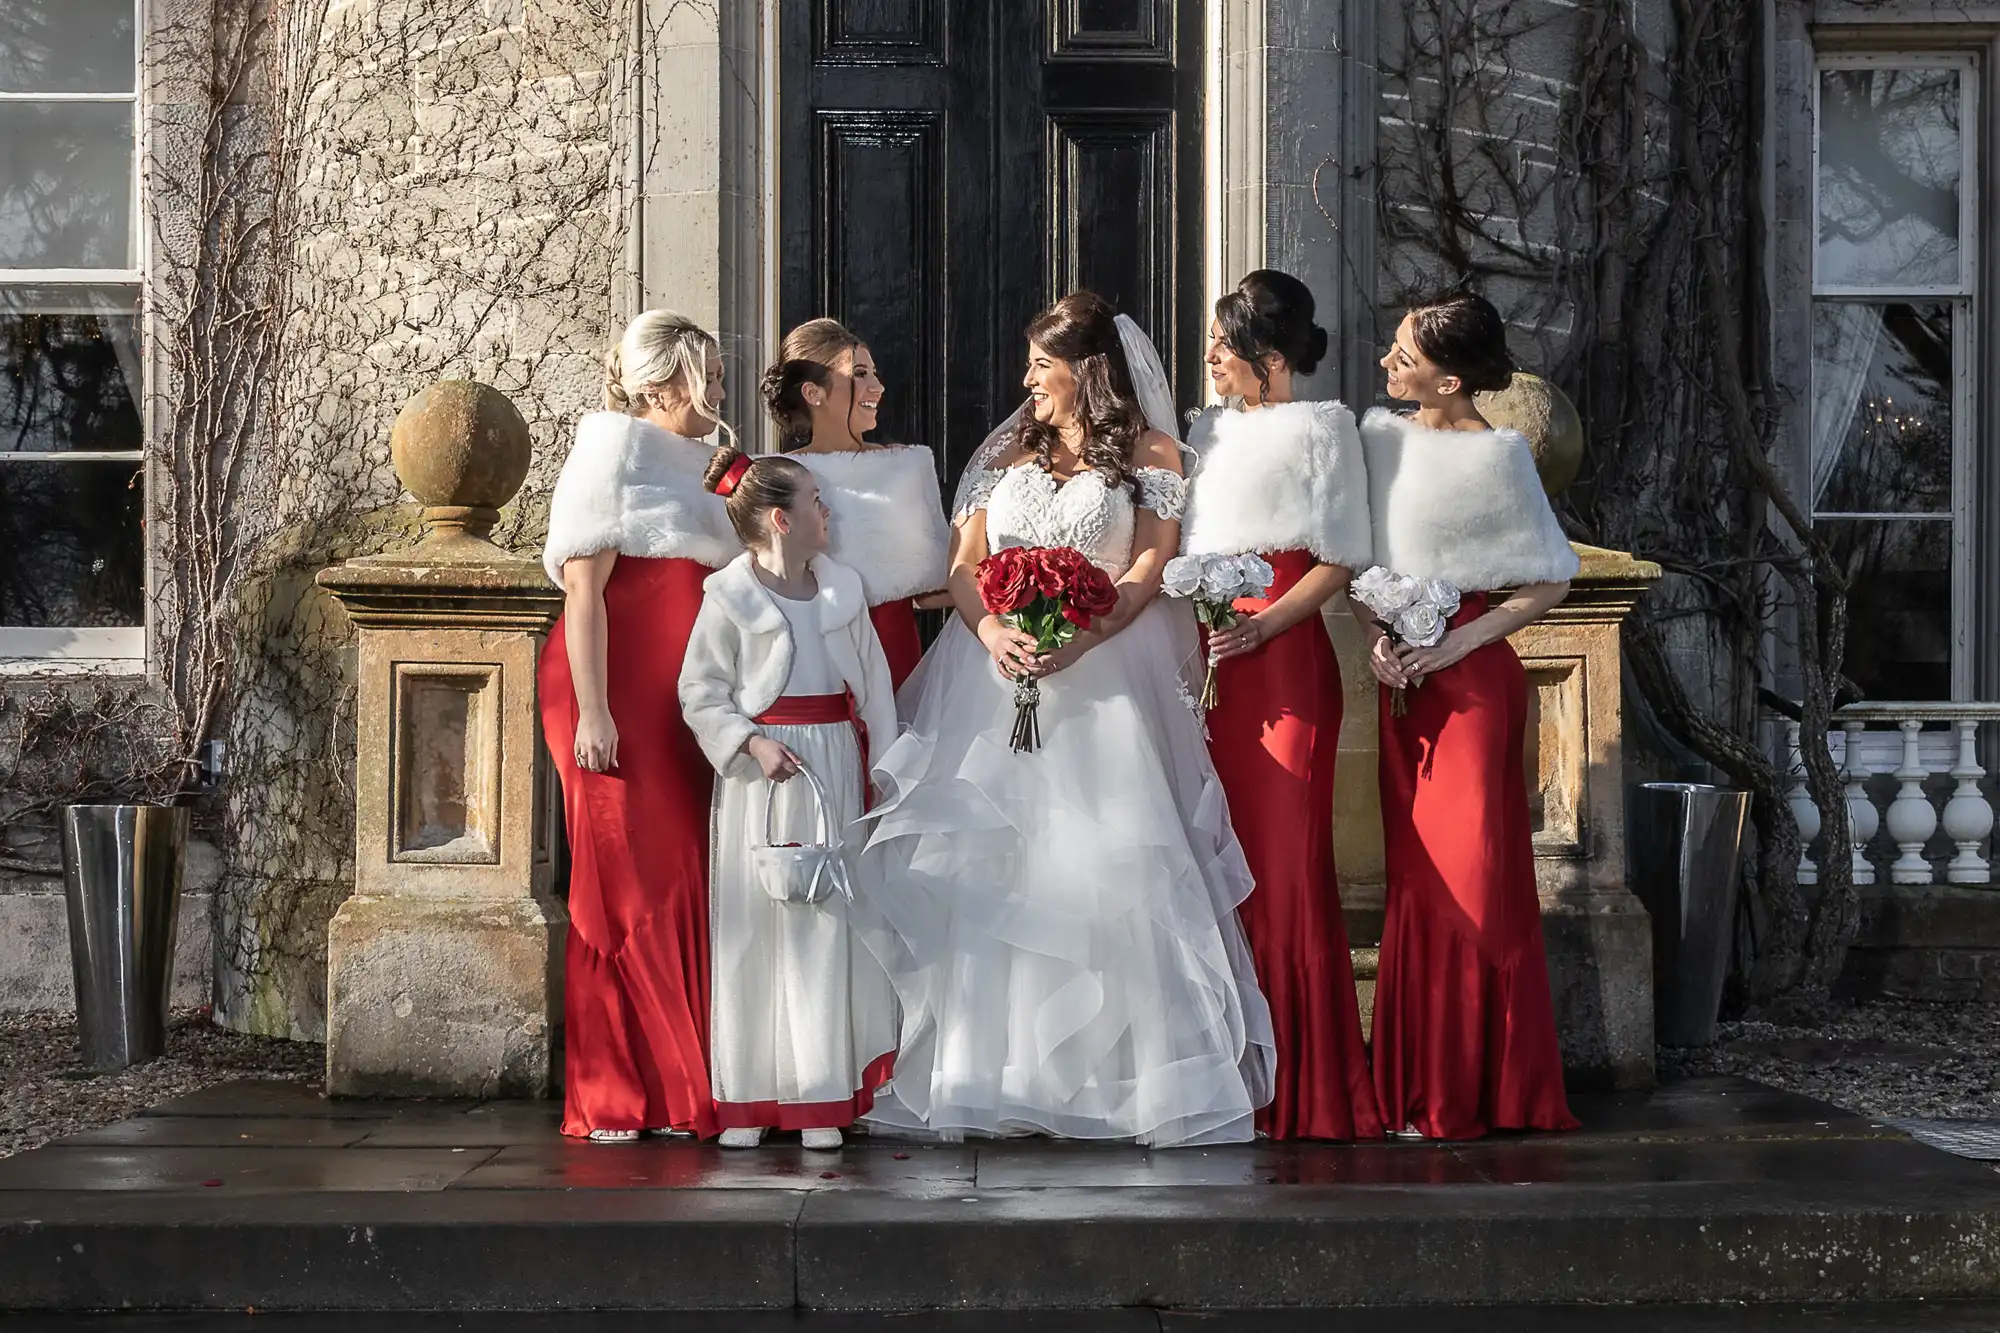 A bride in a white gown holds a red bouquet and stands with five bridesmaids dressed in red dresses and white shawls in front of an ornate building.